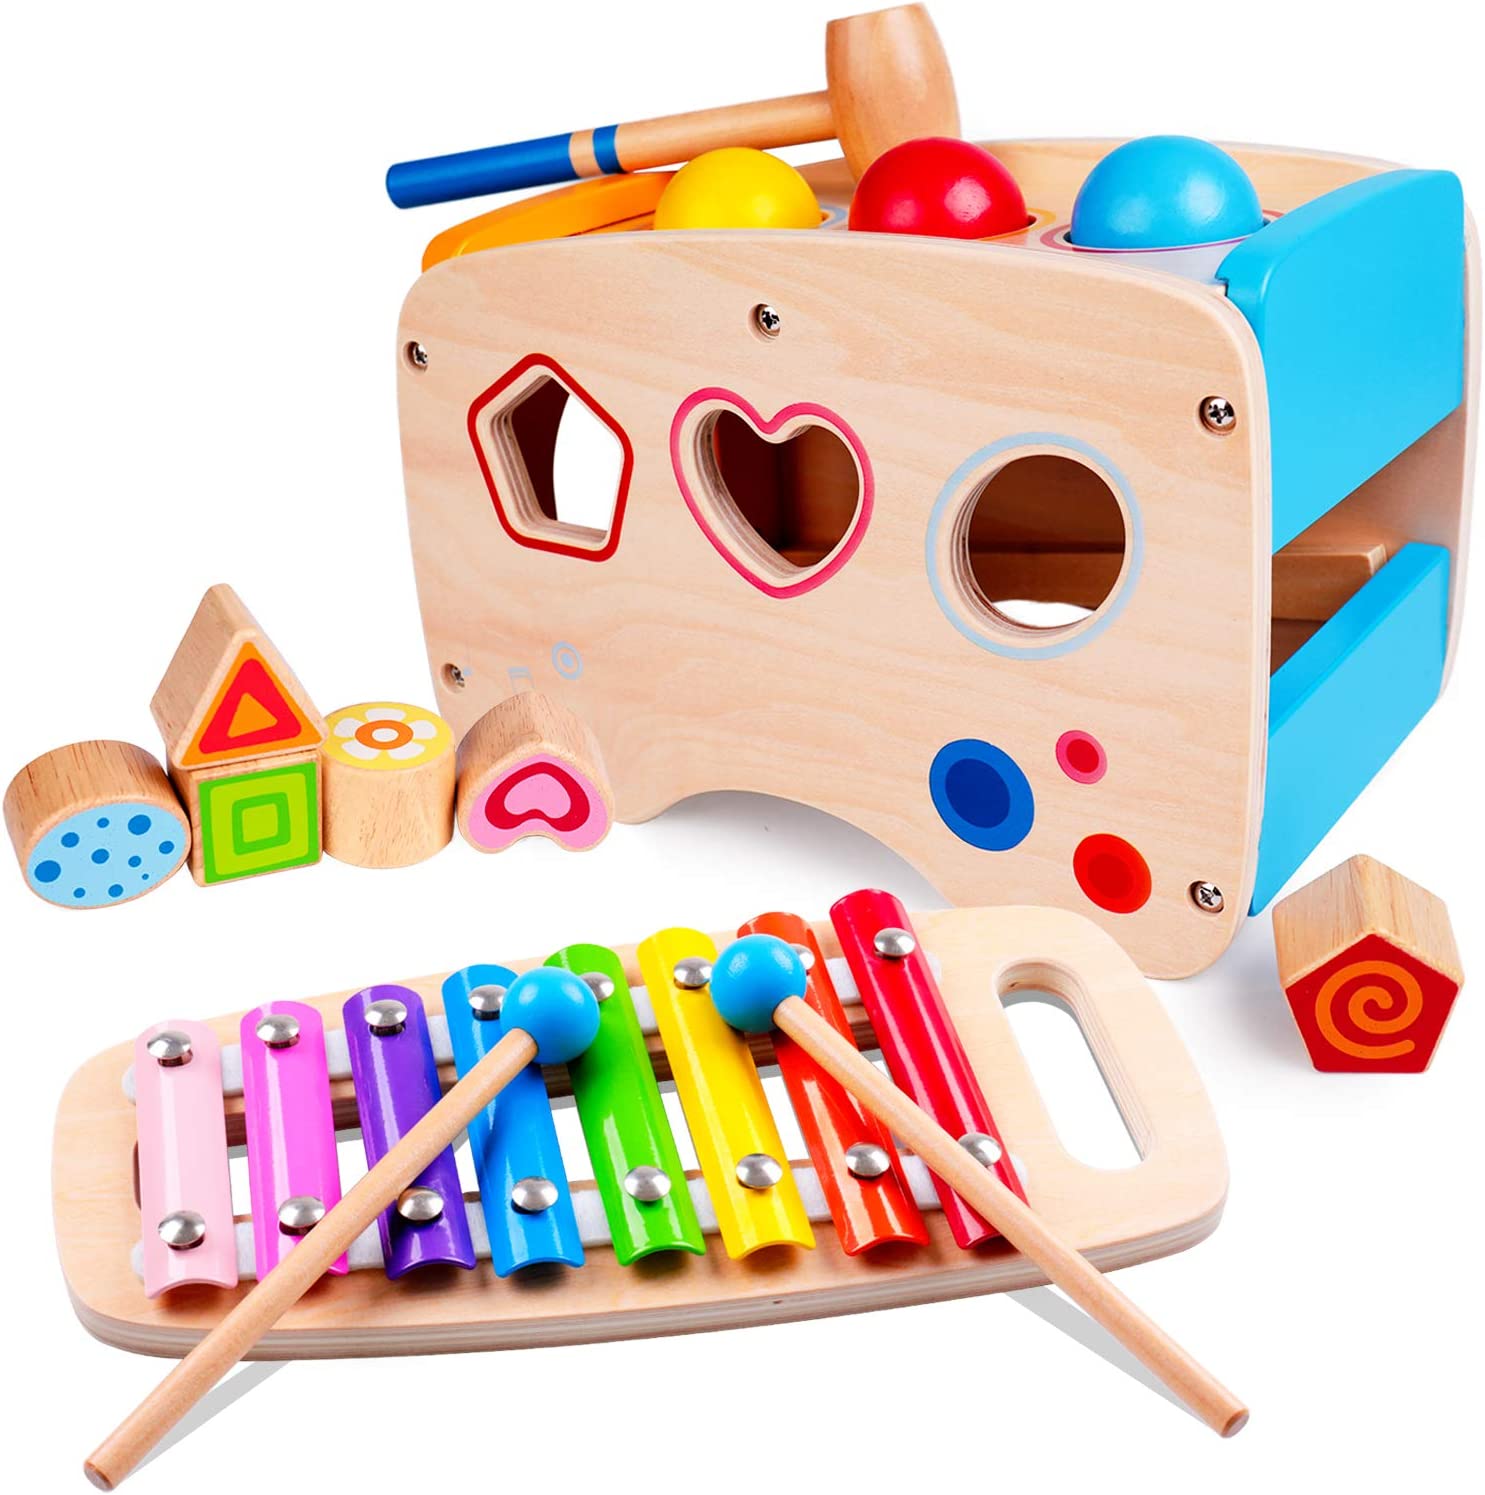 hammering and pounding toys, best toys for 2-year-olds